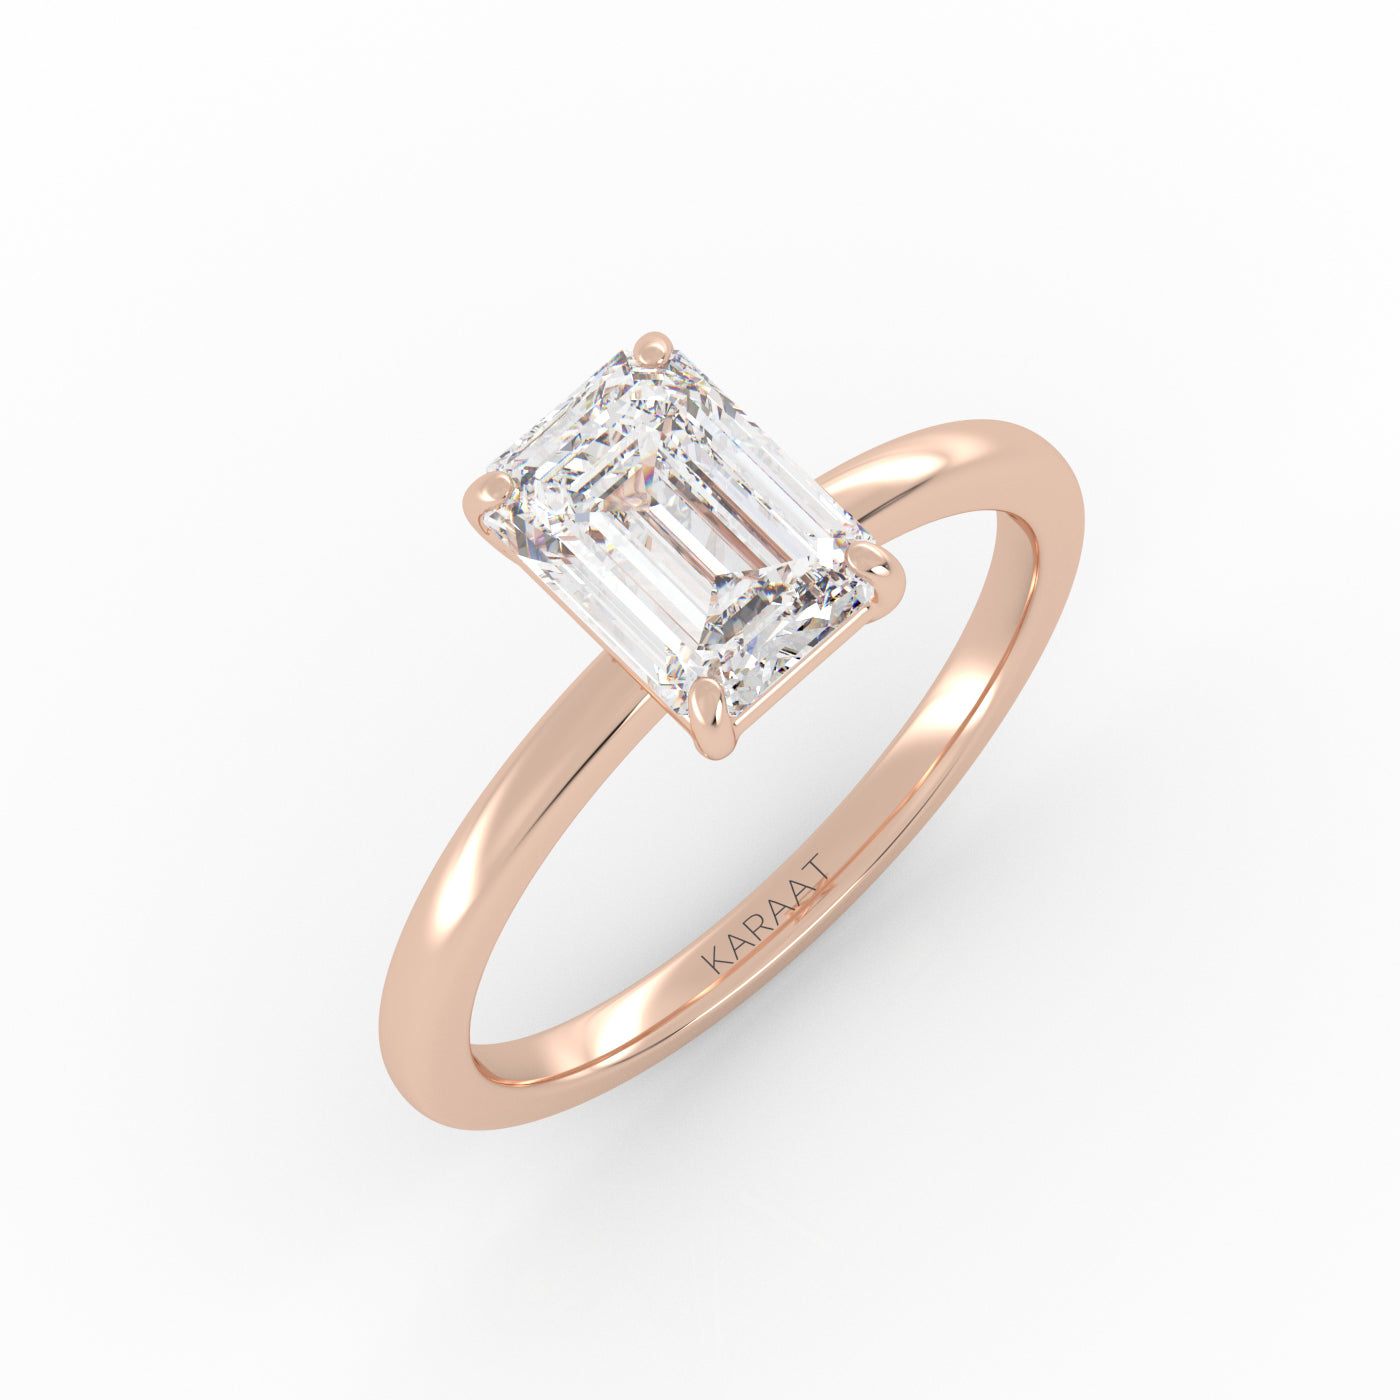 Emerald Solitaire lab-grown diamond ring in a rose gold 4-prong setting. 